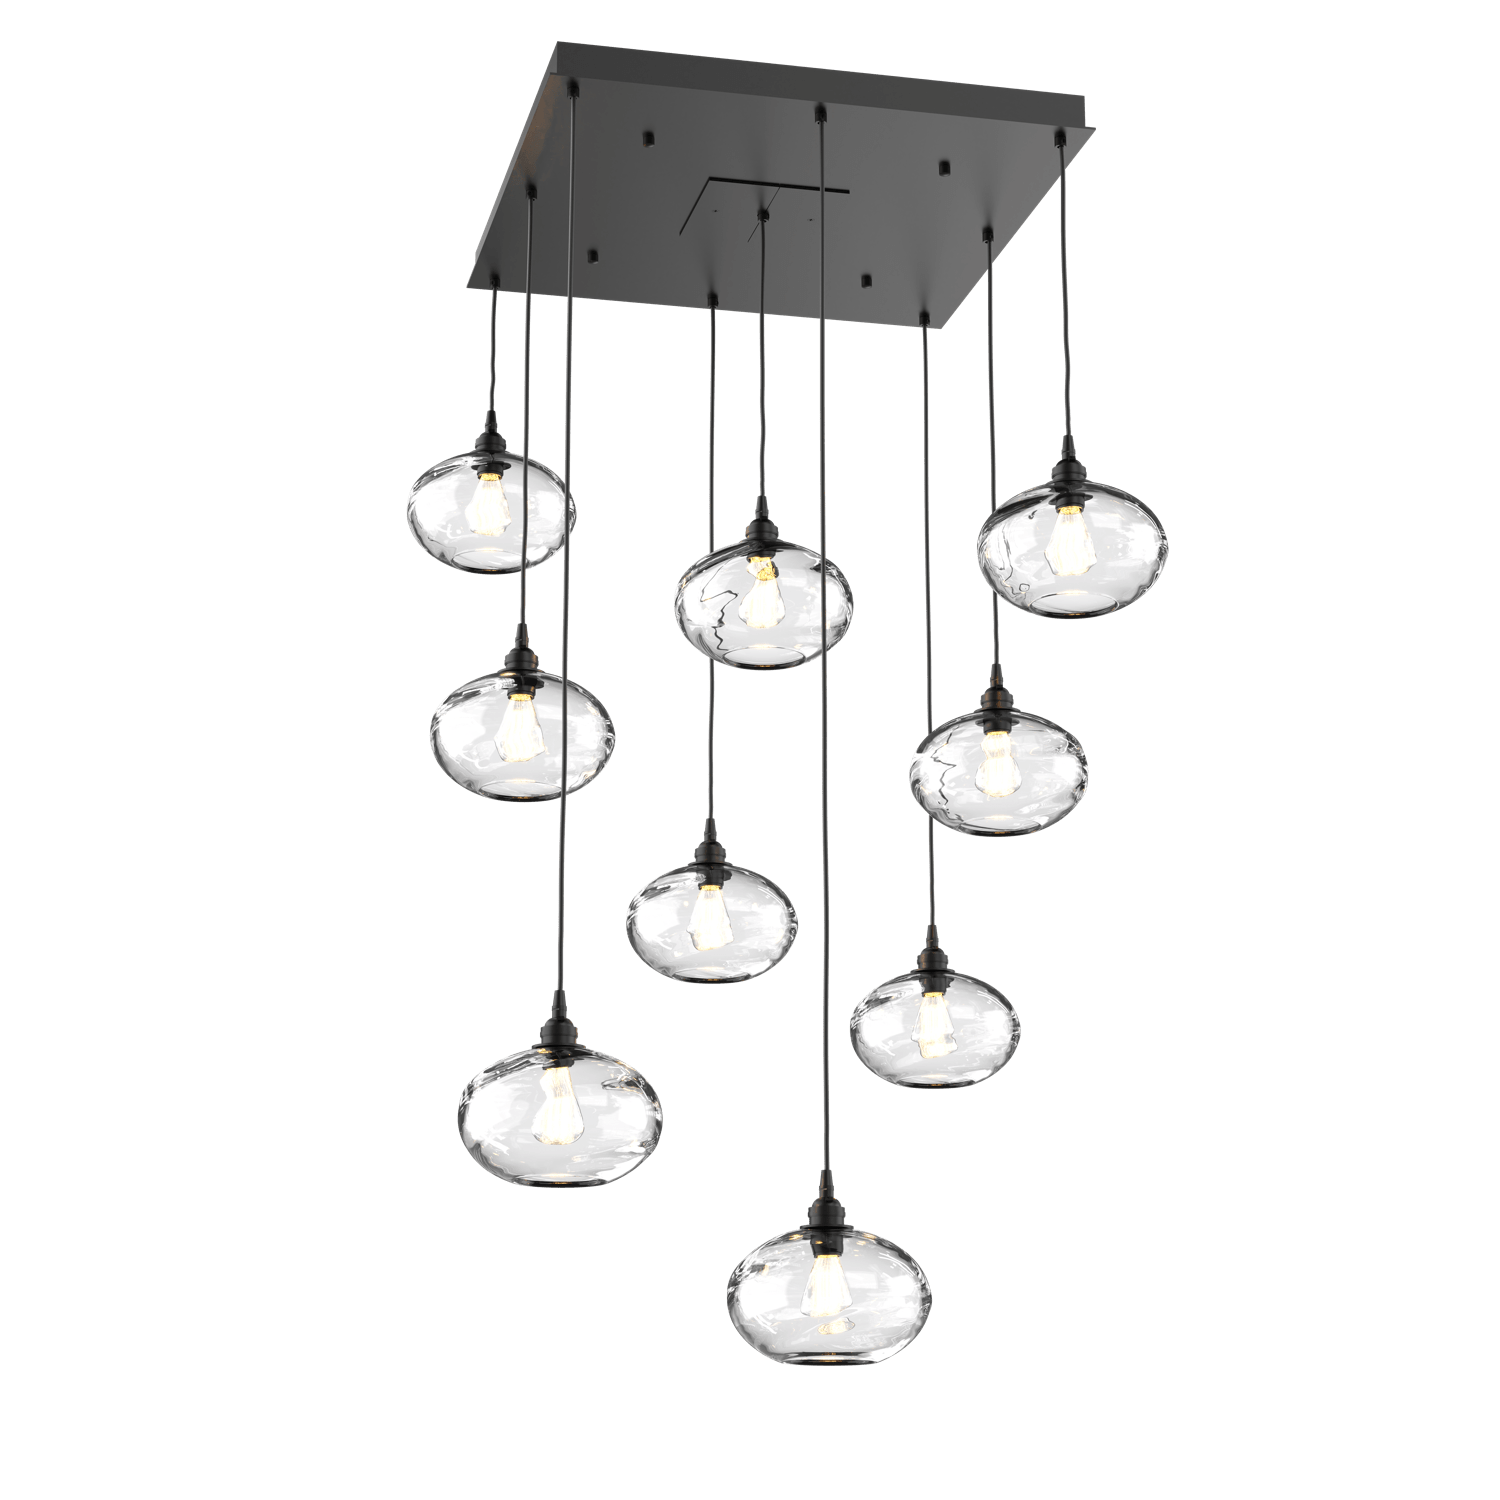 CHB0036-09-MB-OC-Hammerton-Studio-Optic-Blown-Glass-Coppa-9-light-square-pendant-chandelier-with-matte-black-finish-and-optic-clear-blown-glass-shades-and-incandescent-lamping